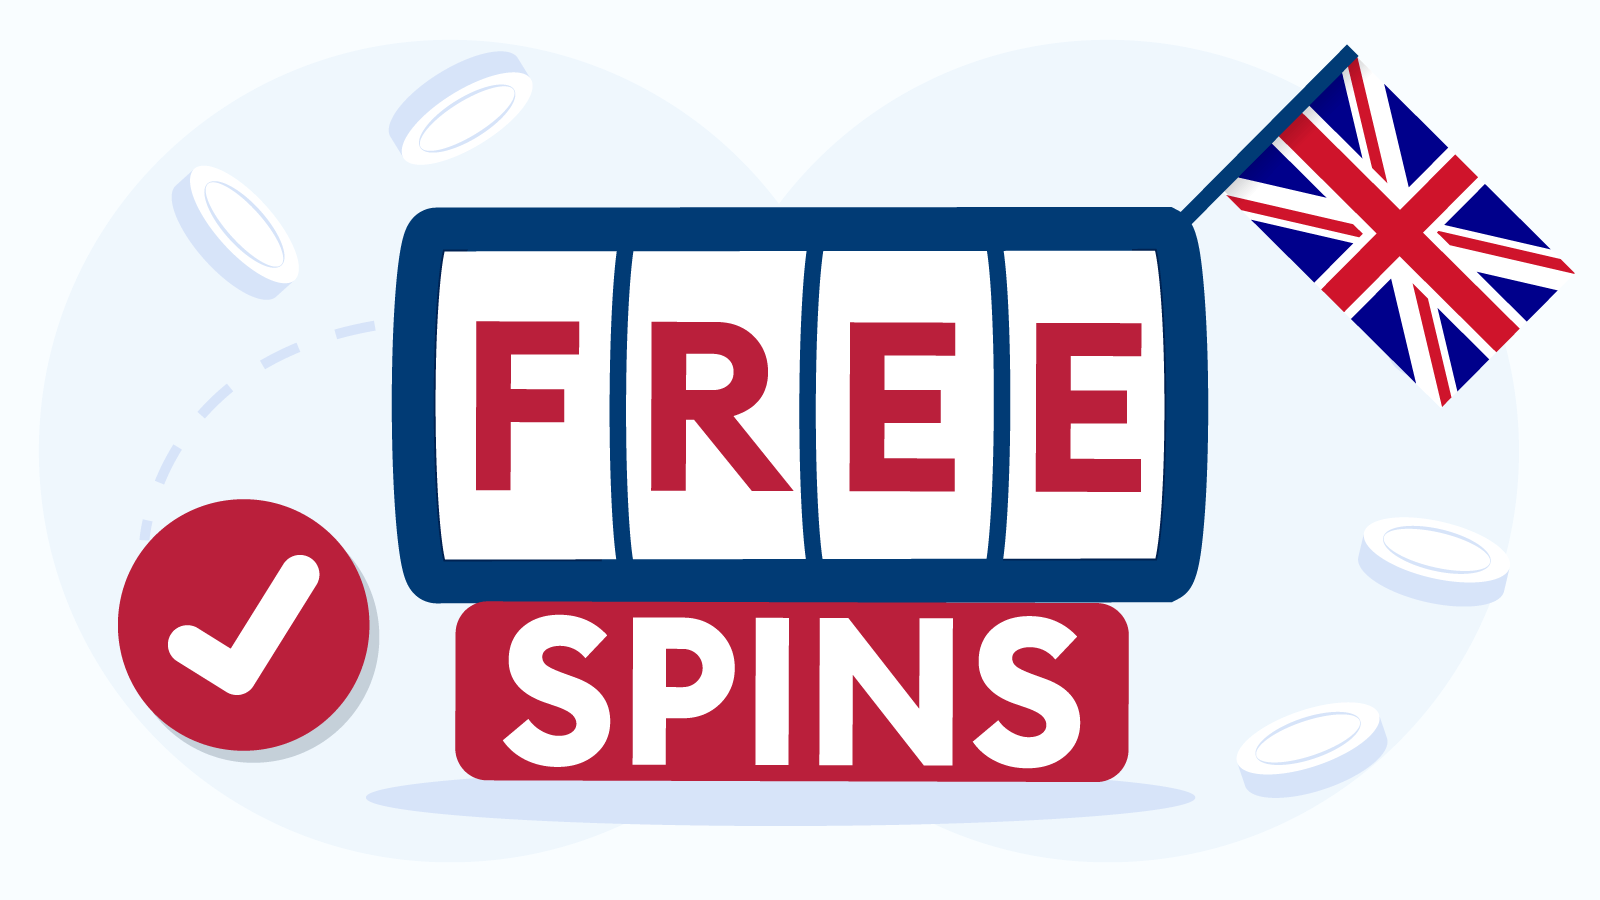 How-to-Choose-Free-Spins-No-Deposit-UK-Offers